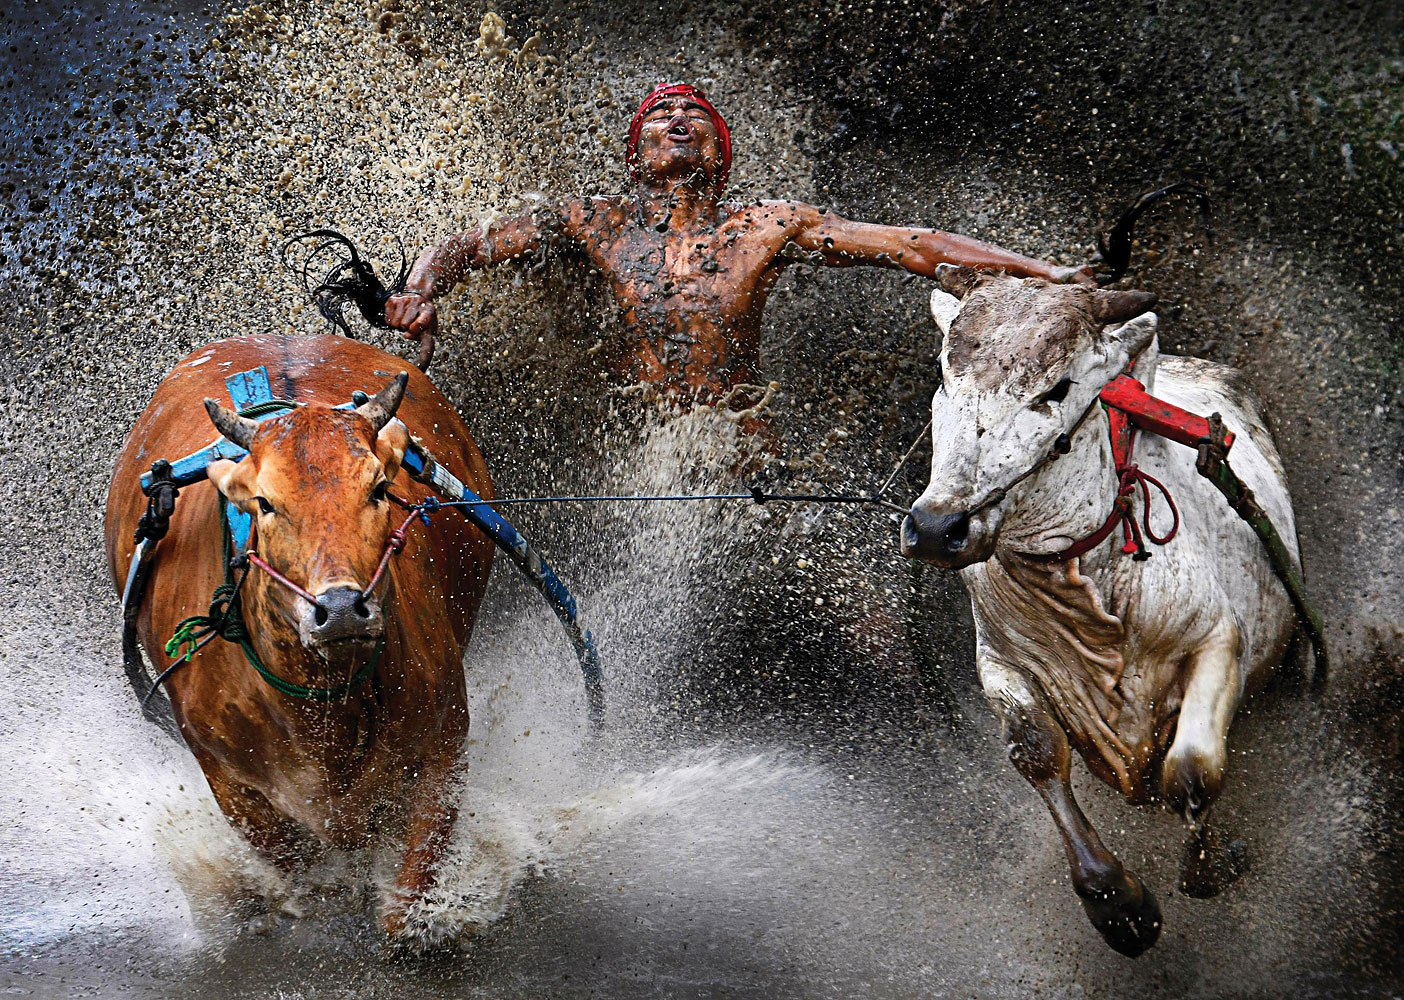 1st Prize Sports – Sports Action Single. Wei Seng Chen, Malaysia. 12 February 2012, Batu Sangkar, West Sumatra, Indonesia. A jockey, his feet stepped into a harness strapped to the bulls and clutching their tails, shows relief and joy at the end of a dangerous run across rice fields. The Pacu Jawi (bull race) is a popular competition at the end of harvest season keenly contested between villages.